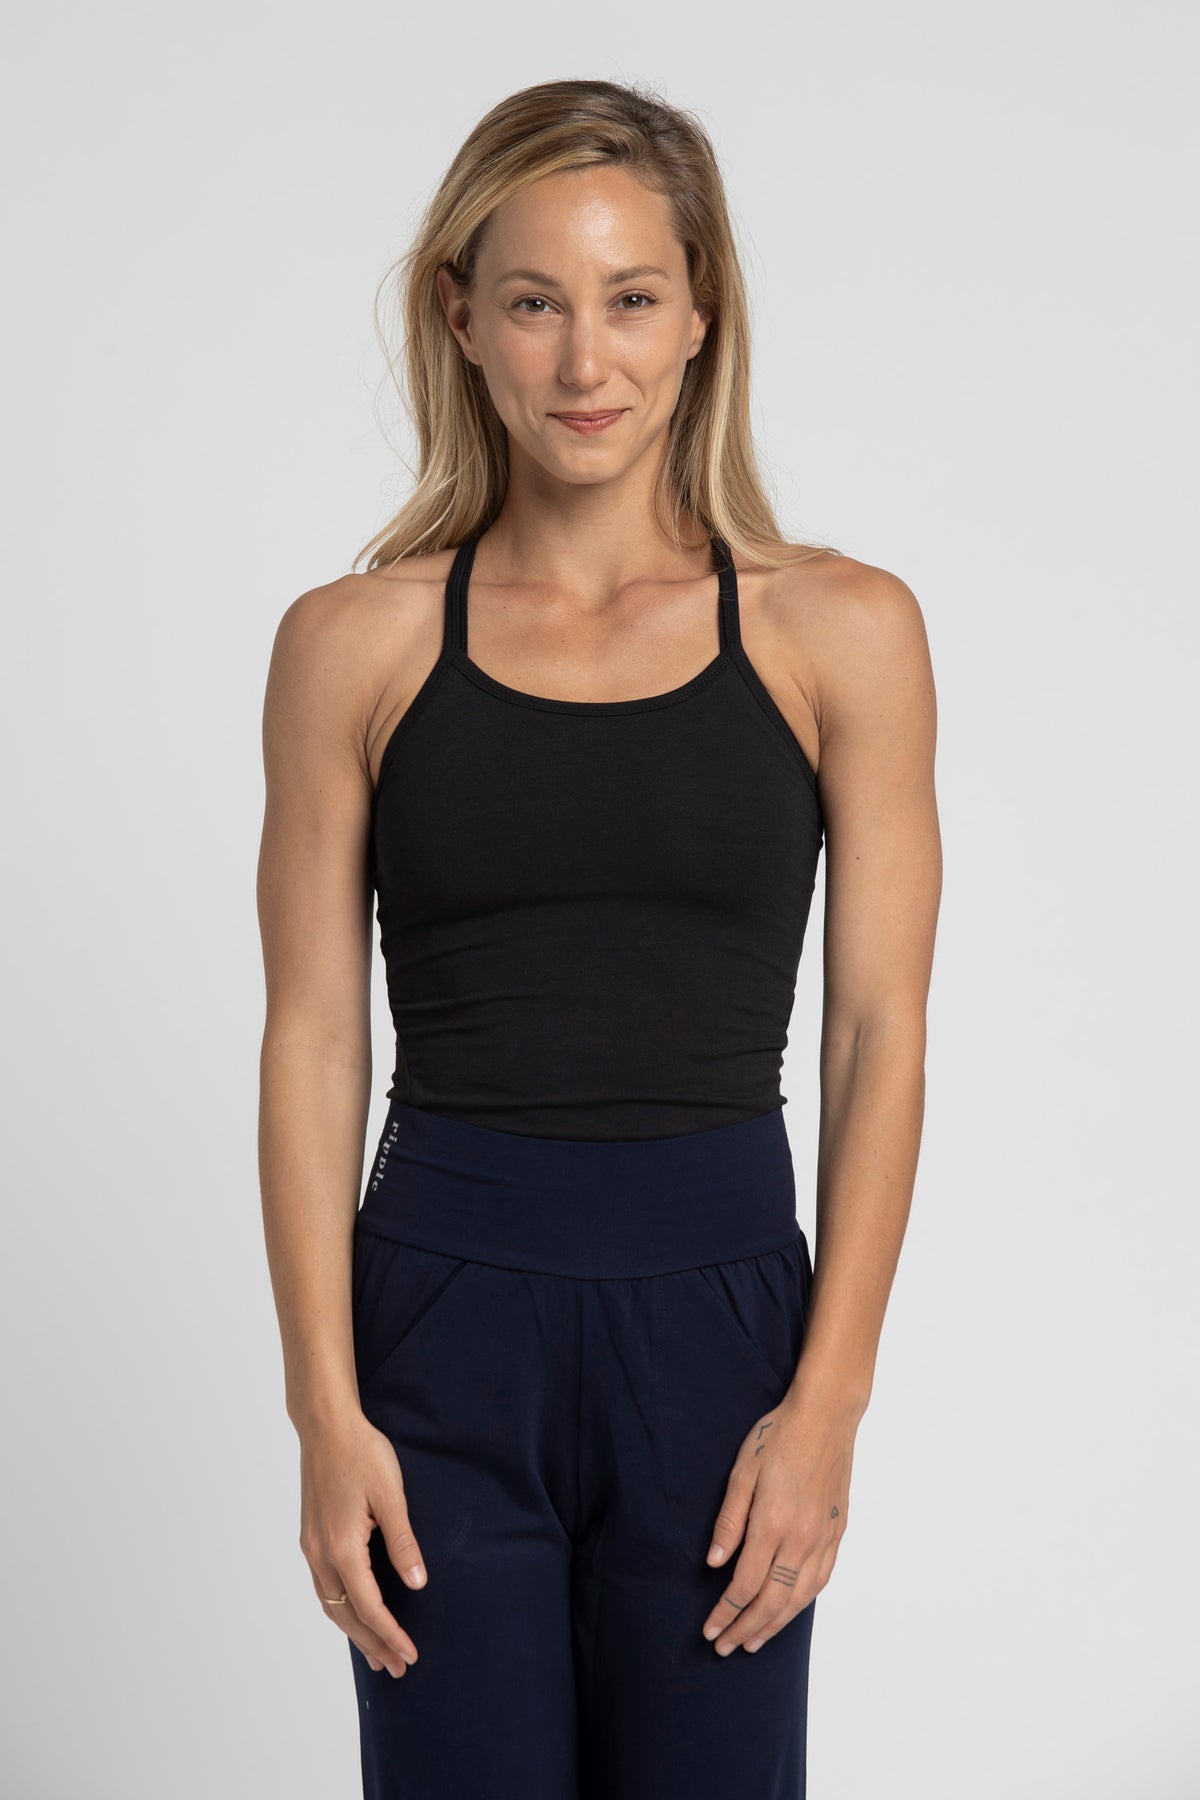 50%off I’mPerfect Criss Cross Tank Top was 25%off